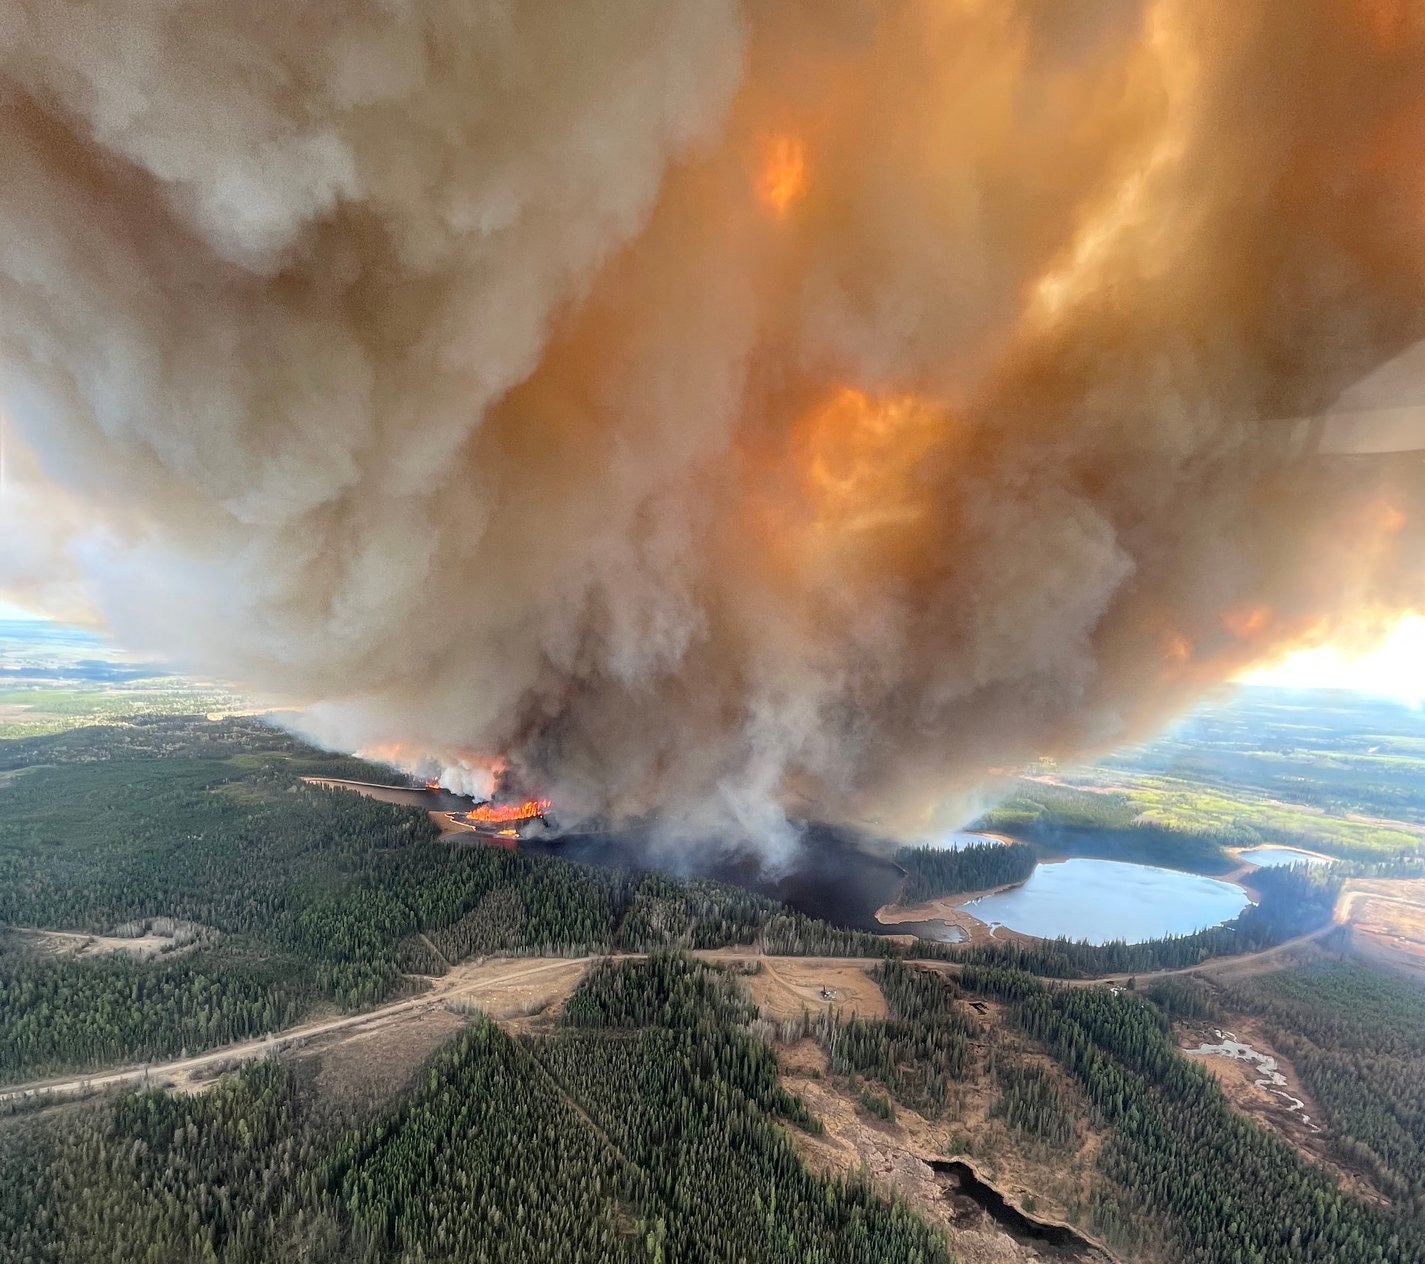 A smoke column rises from a wildfire near Lodgepole, Alberta, Canada on 4 May